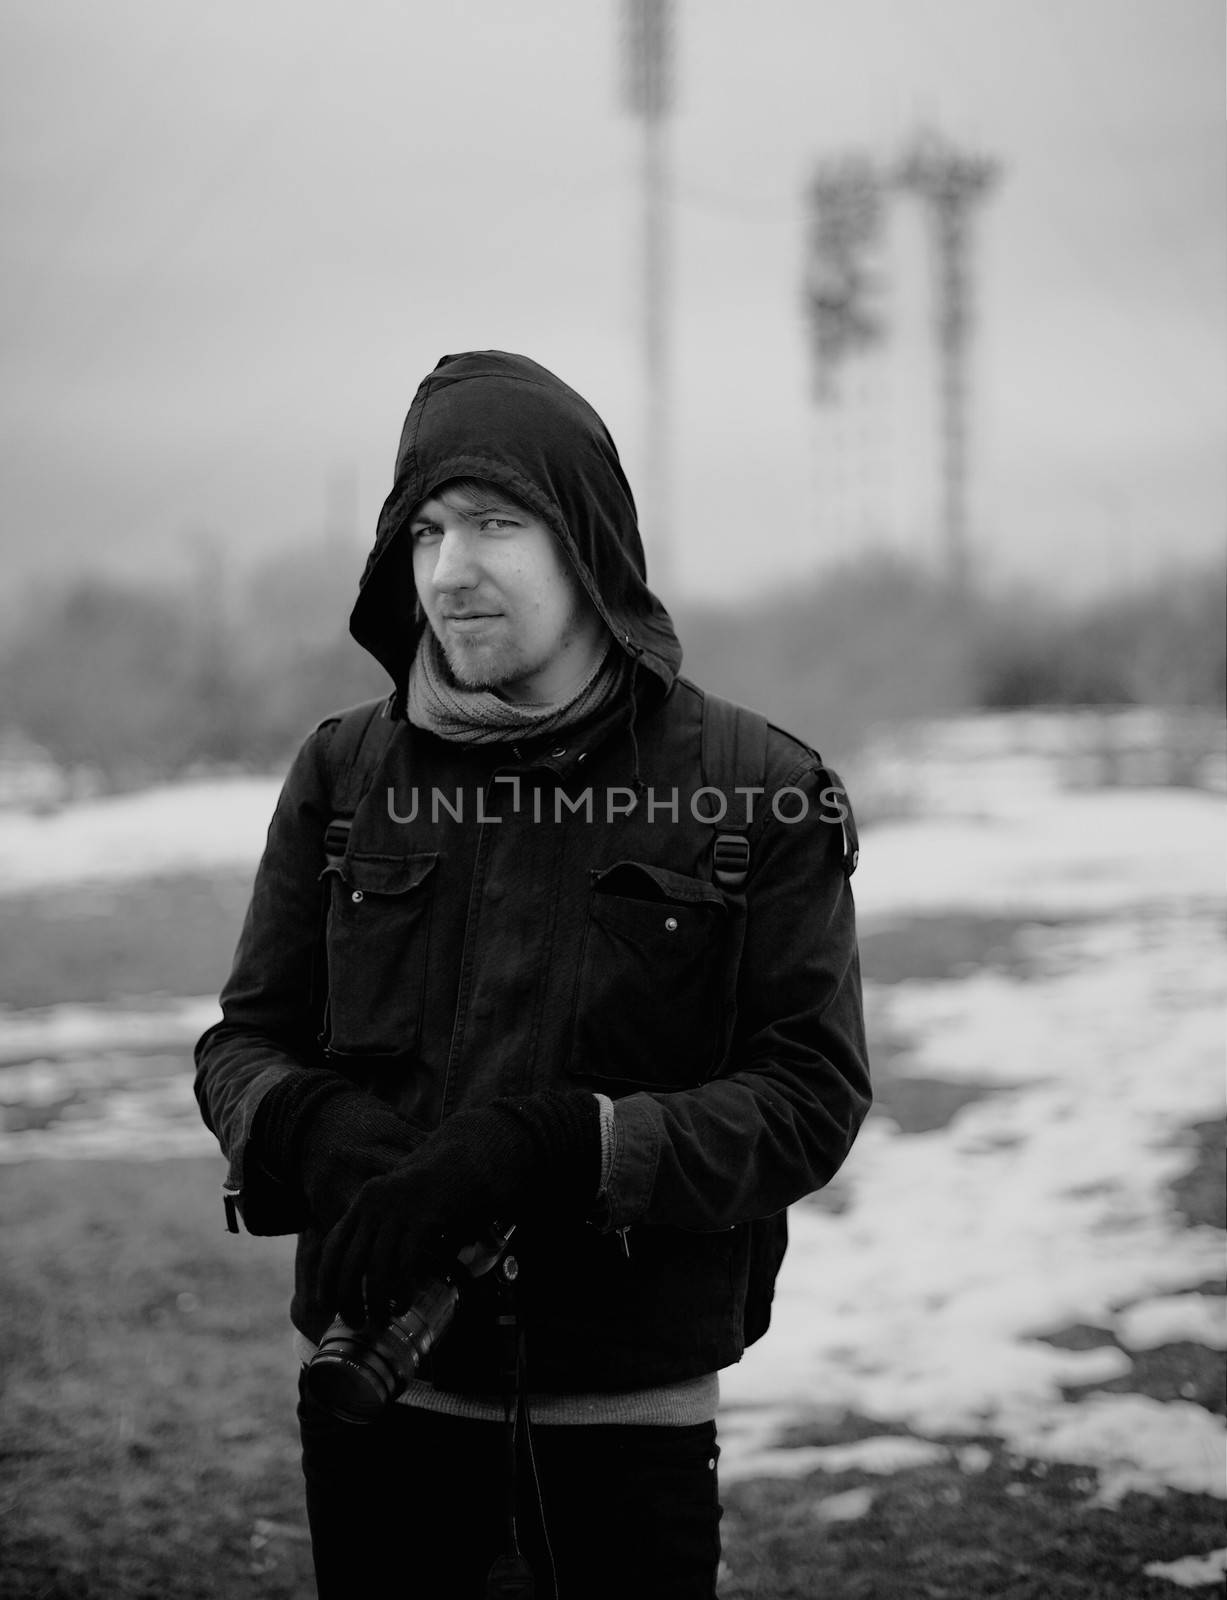 Outdoor photographer portrait in misty weather, black and white